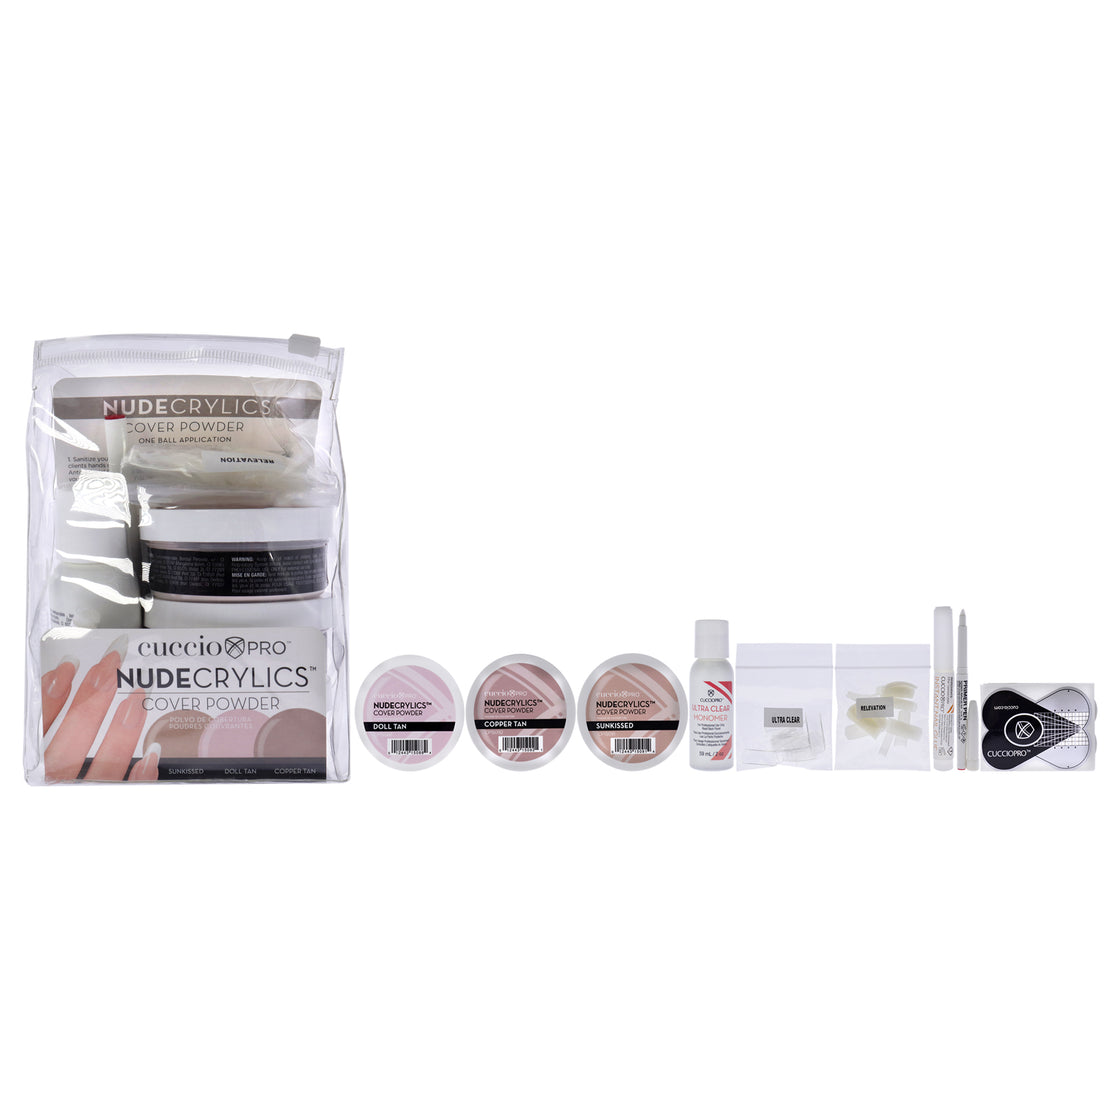 Nudecrylics Cover Powder Kit by Cuccio Pro for Women - 9 Pc 3 x 1.6oz Powders - Dolll Tan, Sunkissed, Cooper Tan, 0.07oz Primer Pen, 0.07oz Instant Nail Glue, 2oz Ultra Clear Monomer, 20 High C Curve Tips Assorted, 20 Ultra Wear Tips Clear, 20 Nail Forms